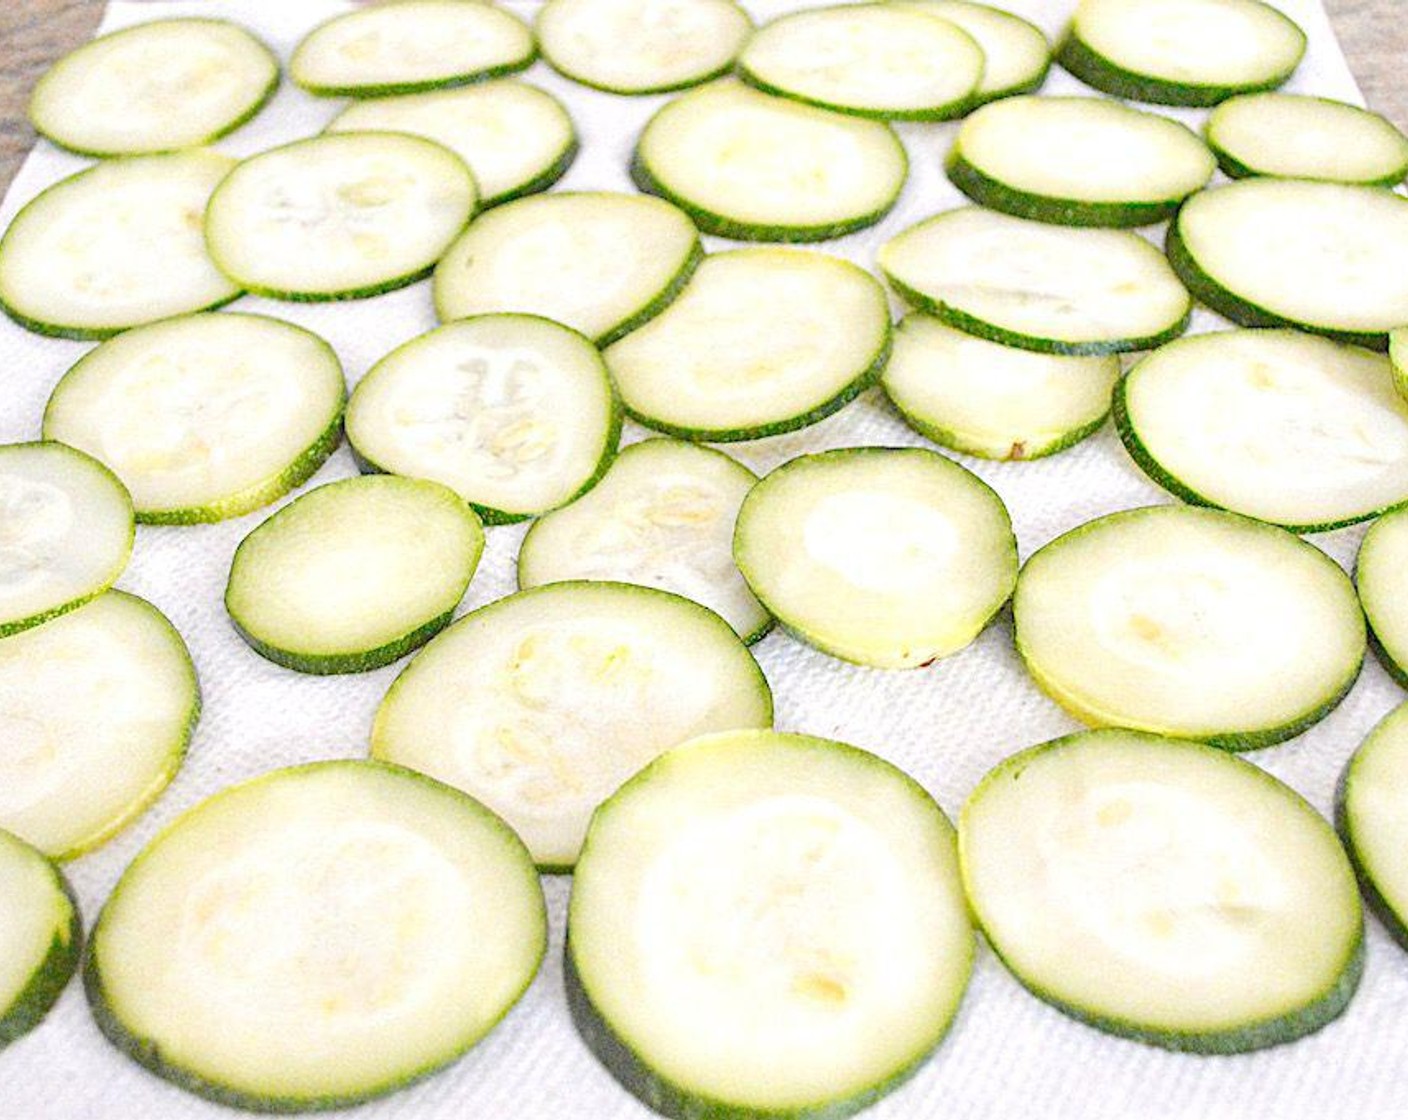 step 2 Use either a very sharp knife or mandolin to slice the Zucchini (1) into really thin discs. Place the slices on paper towels and layer more paper towel on top of them. Press firmly to wring out a lot of the moisture from the slices, which is the enemy in this dish. Then lay them out on the lined sheet trays in a single layer.